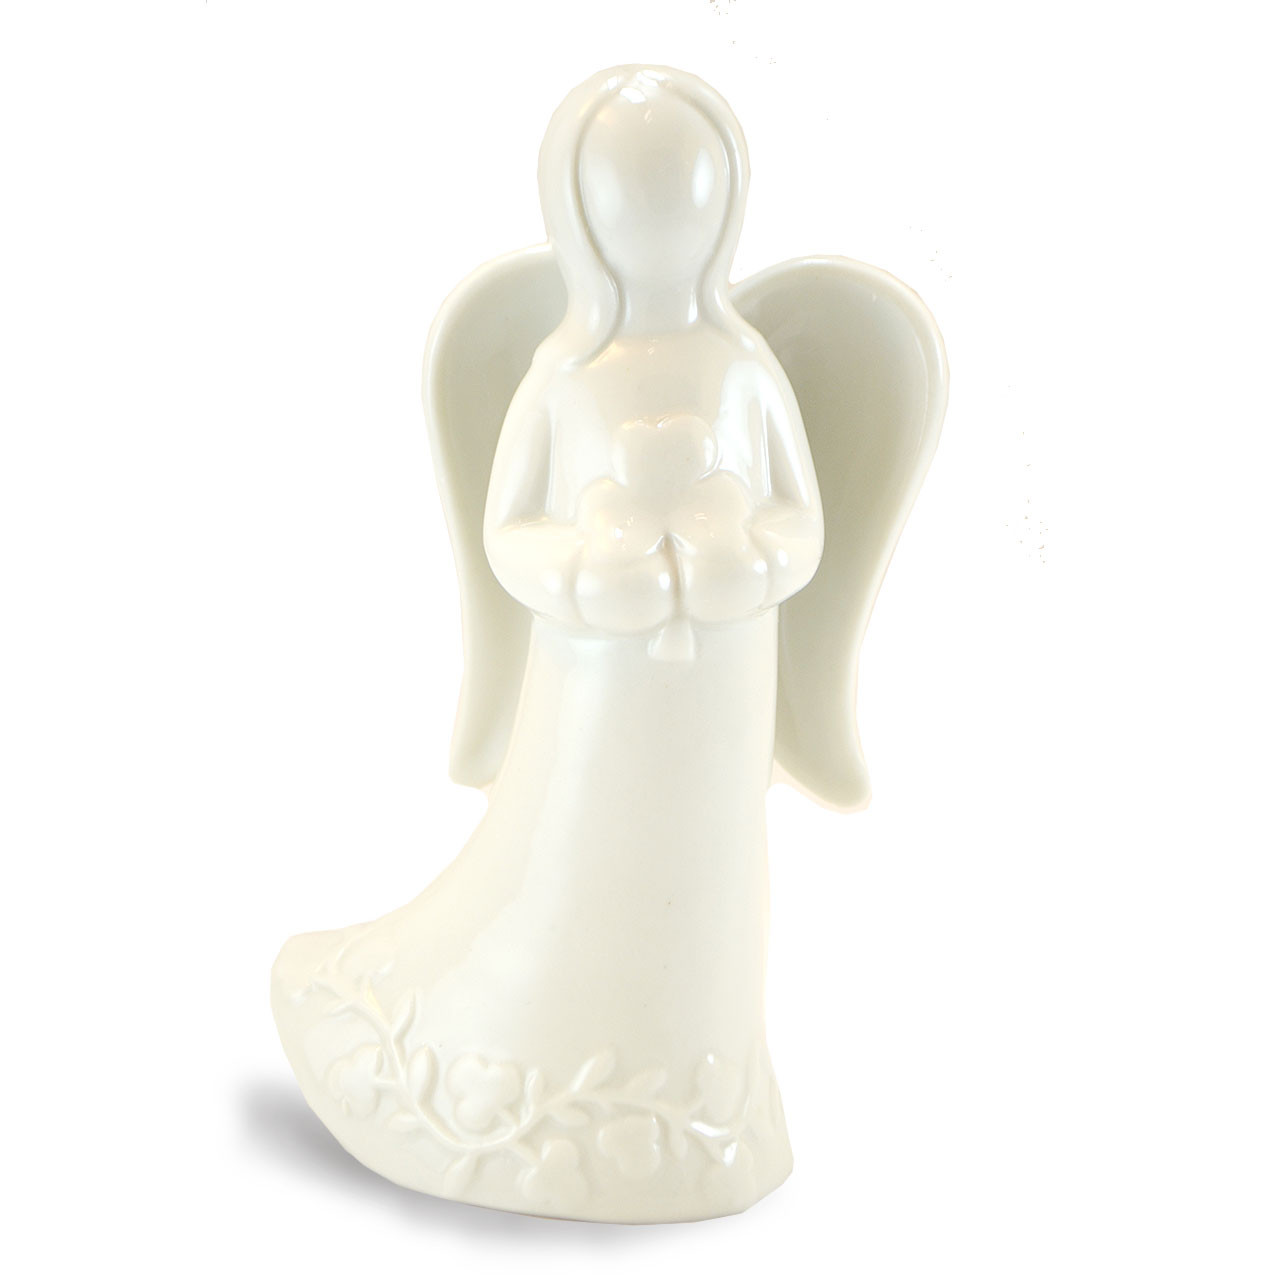 Friends are angels following you through life. Ceramic trinket